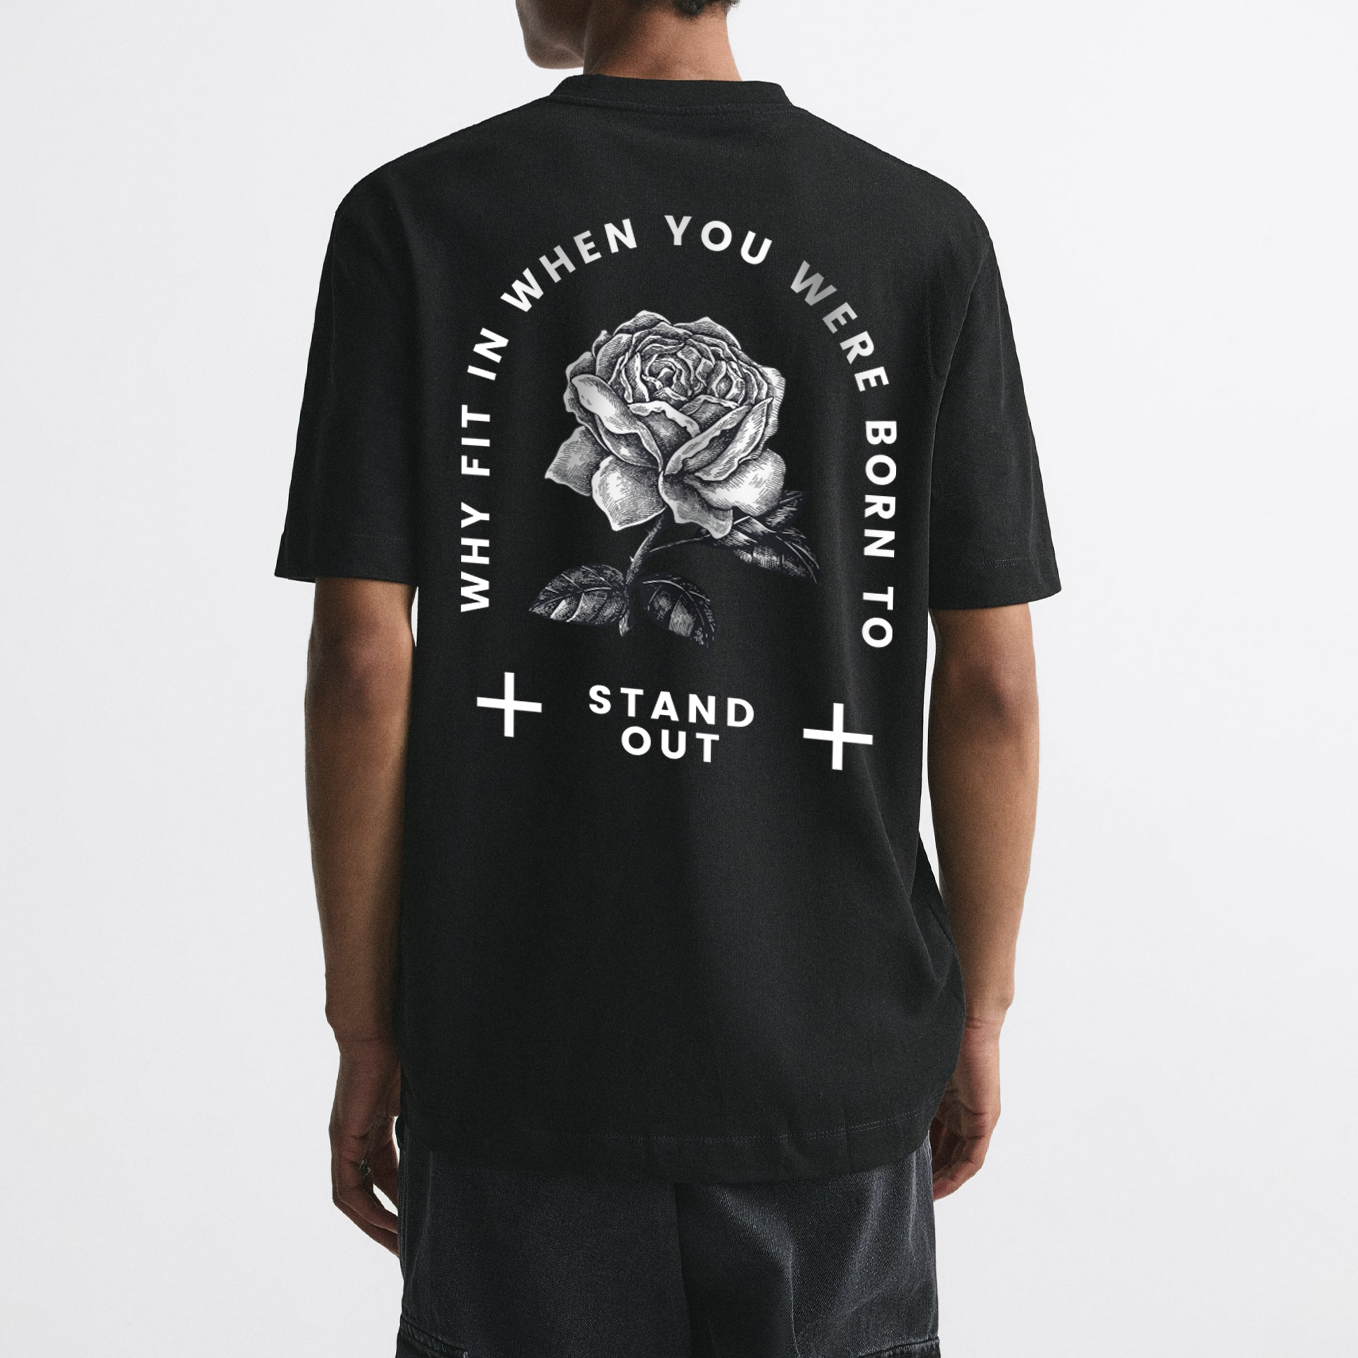 T-shirt "Stand Out"